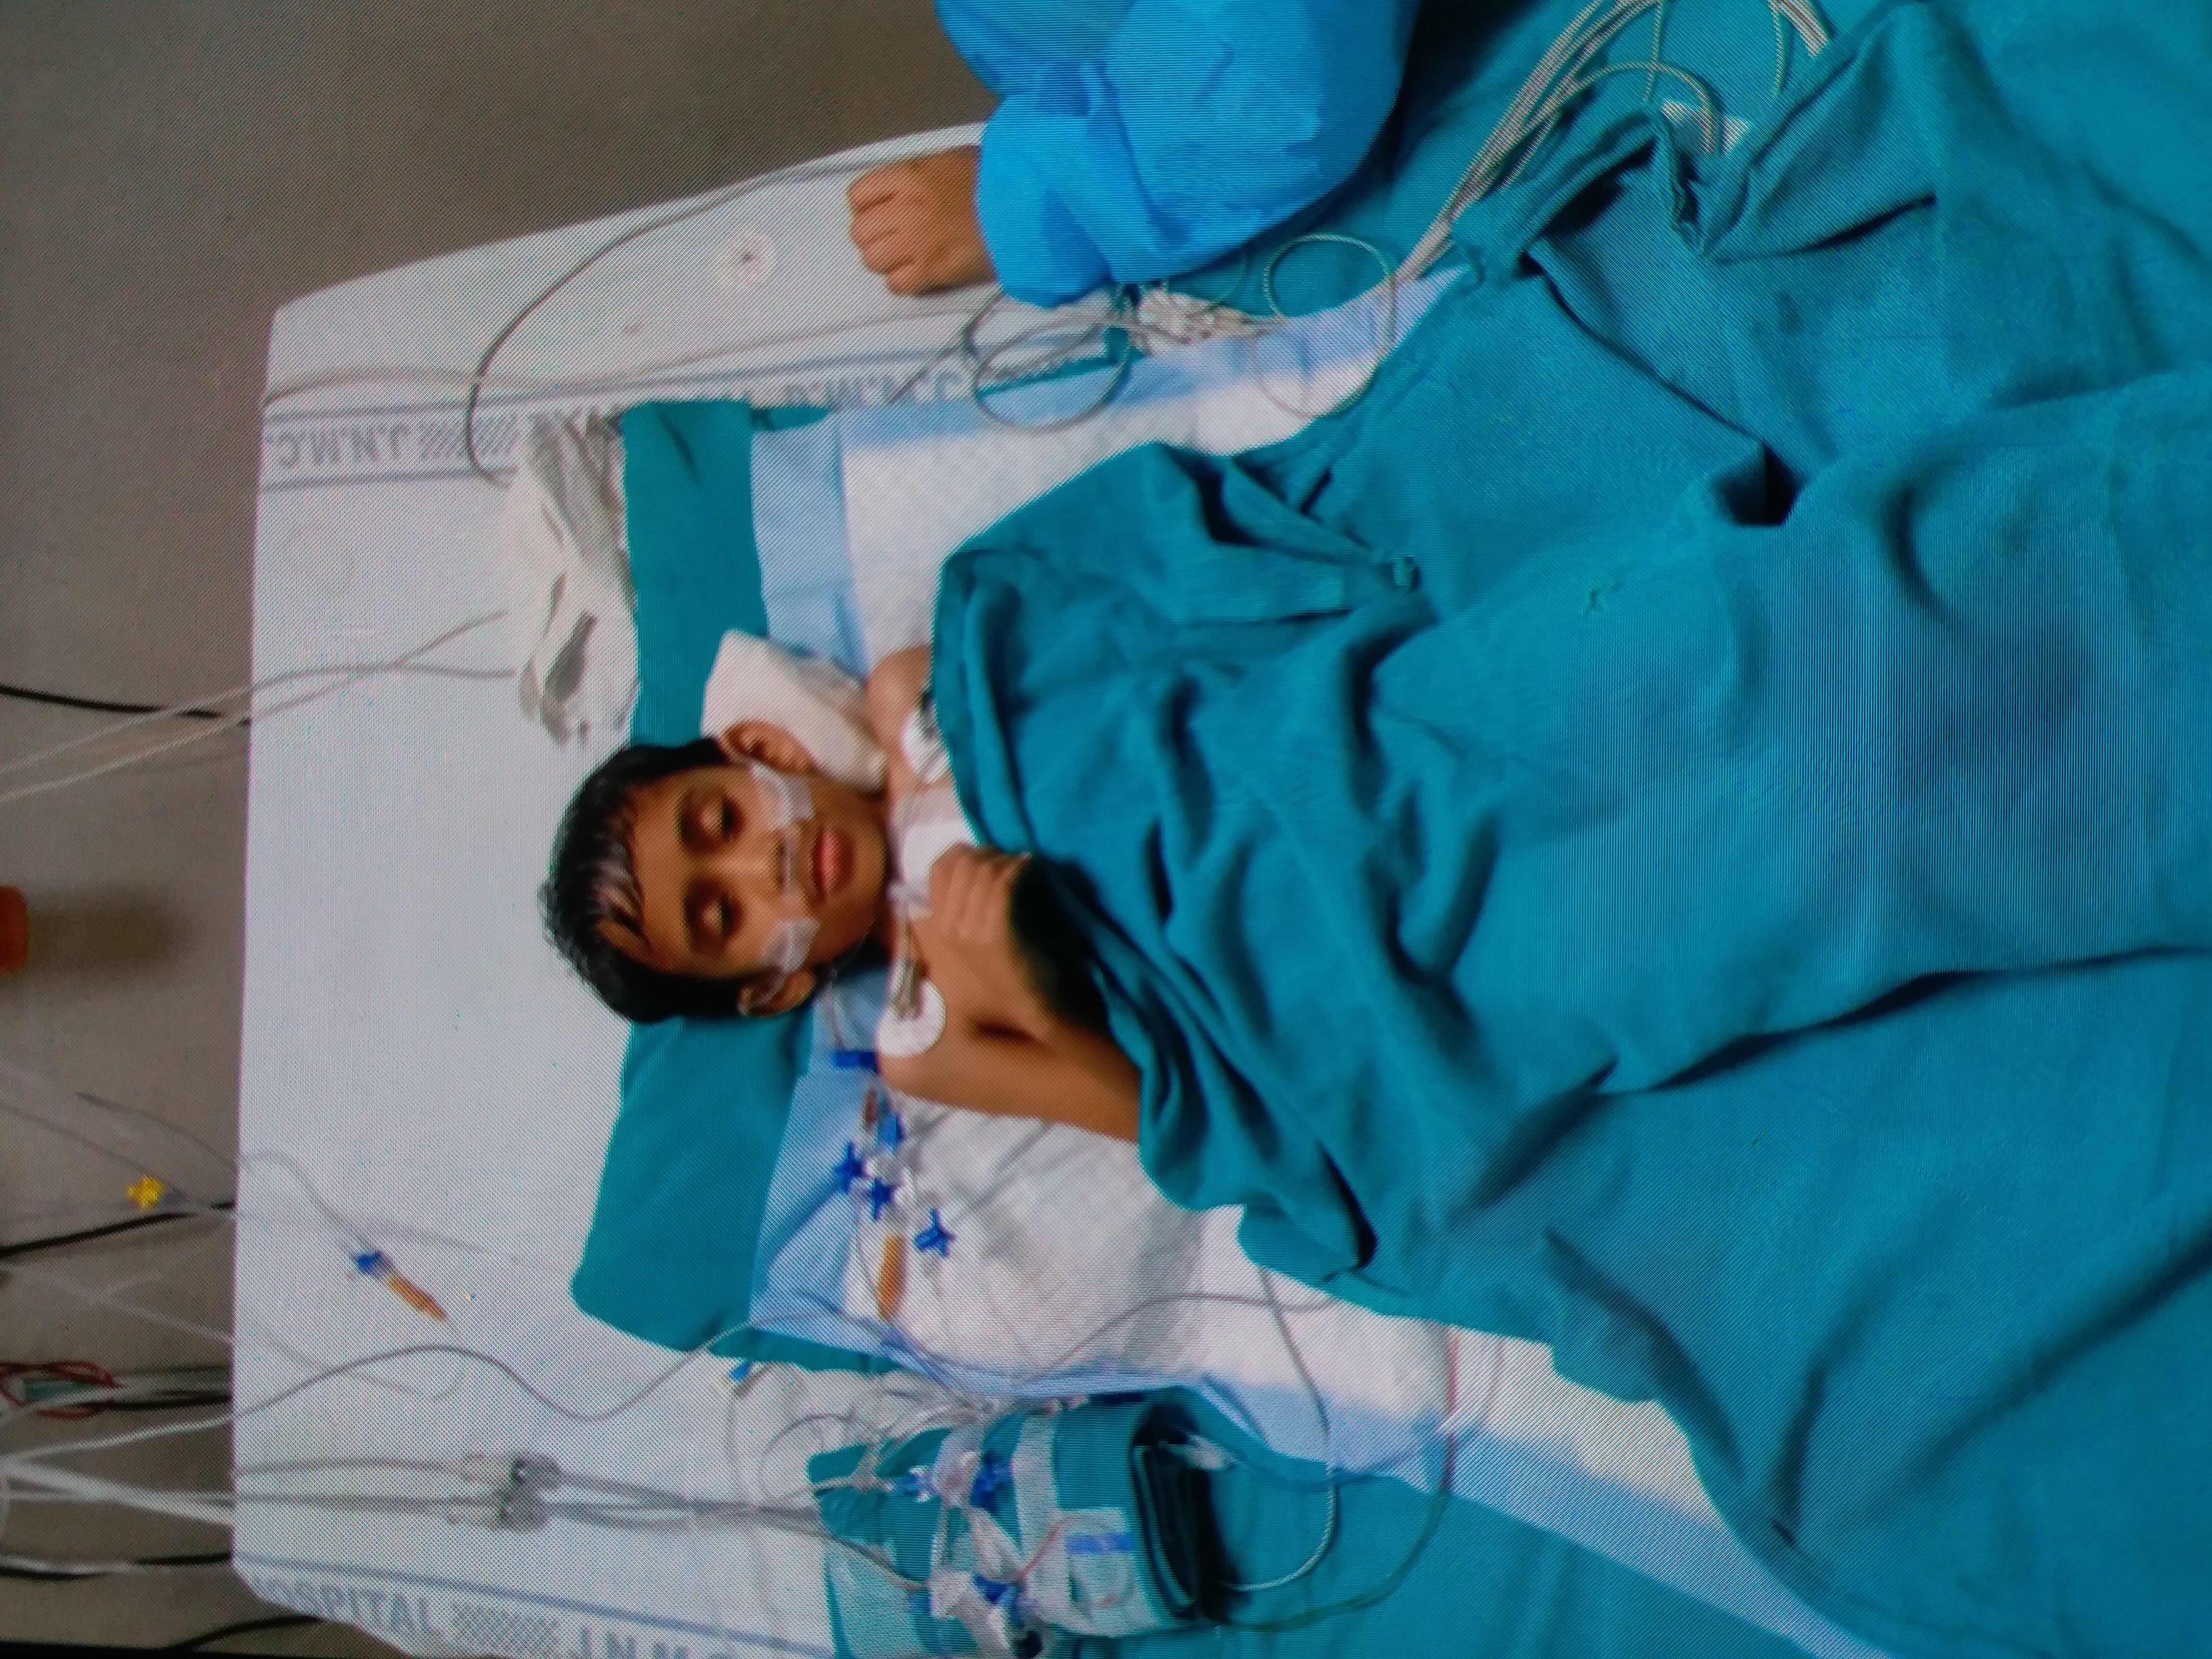 Successful heart operation of four year old child